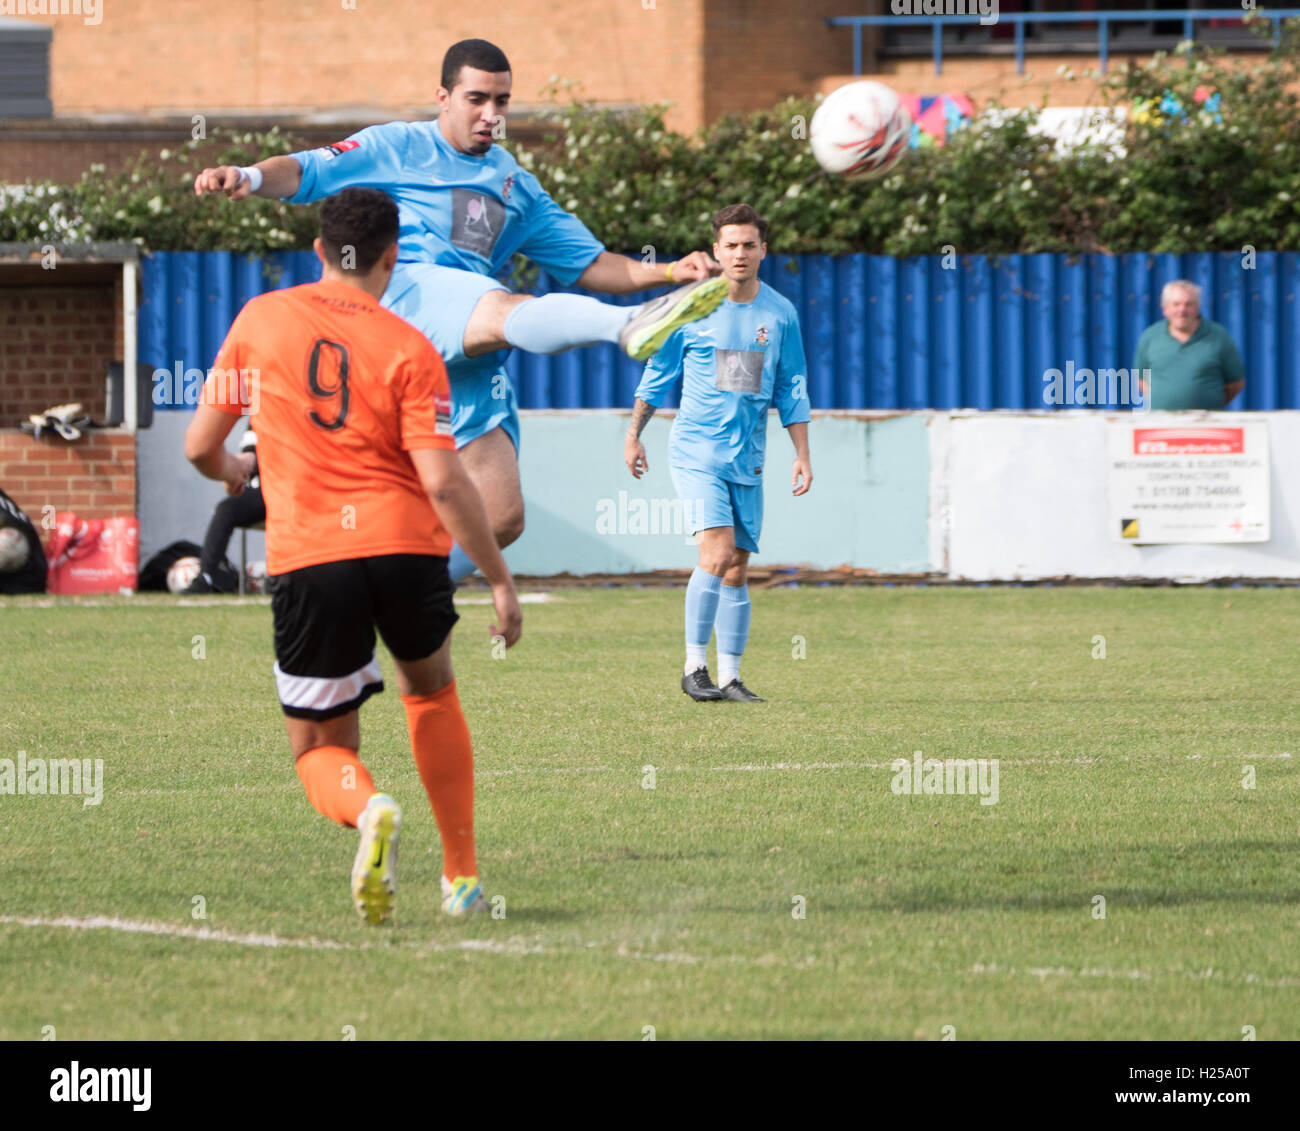 Brentwood, Essex, UK. 24th September, 2016. Brentwood, Essex, Brentwood Town FC vs Bury Town FC, Nick Ingram (() of Bury moves in for a challenge. Credit:  Ian Davidson/Alamy Live News Stock Photo